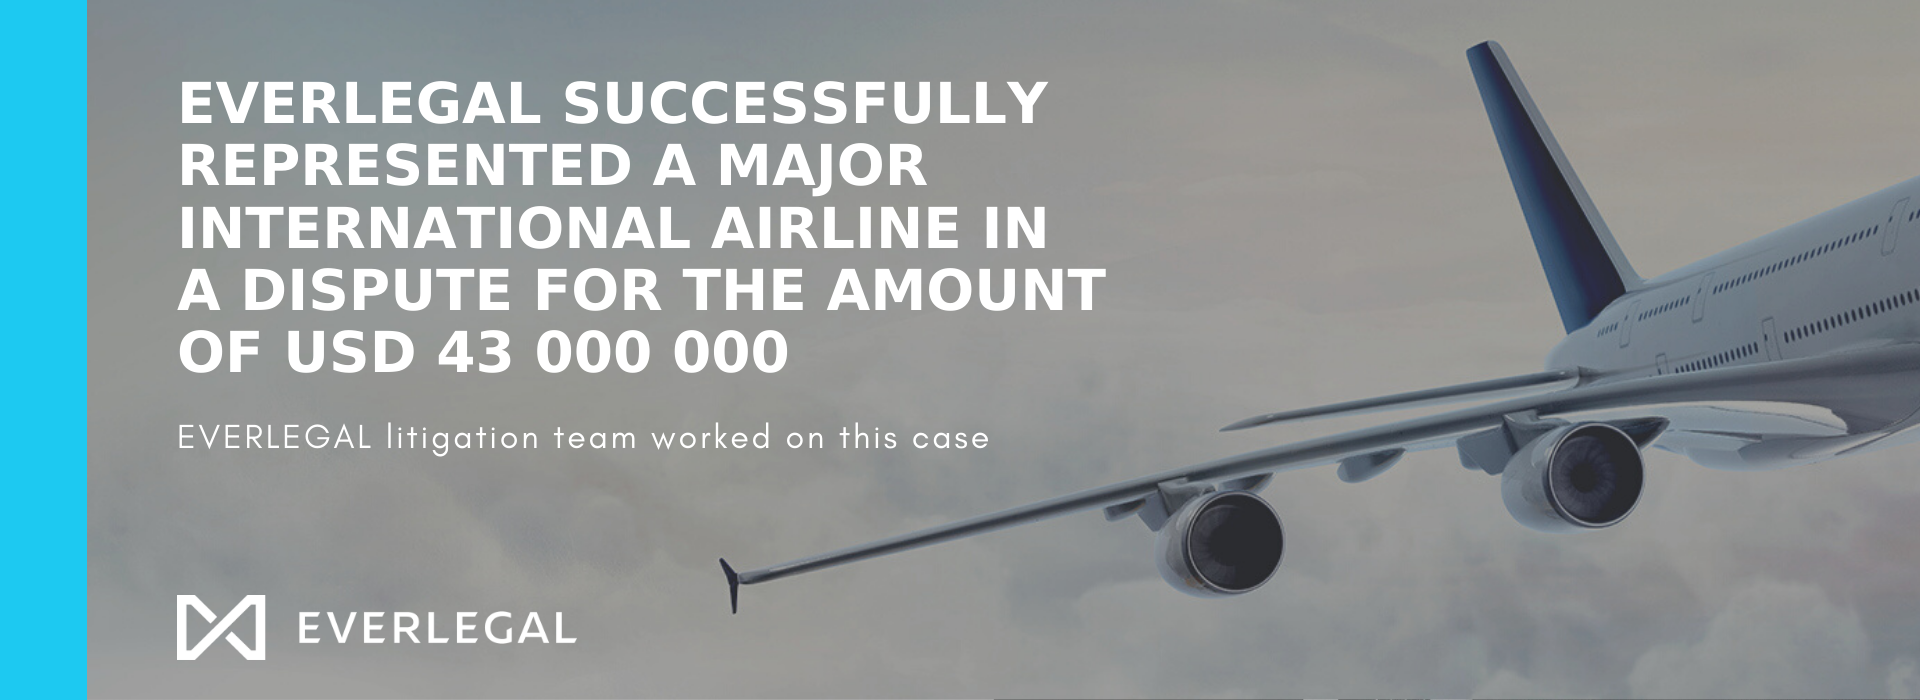 Everlegal Won a Court Dispute on The Collection of More Than $43 Million in Favor of a Major International Airline